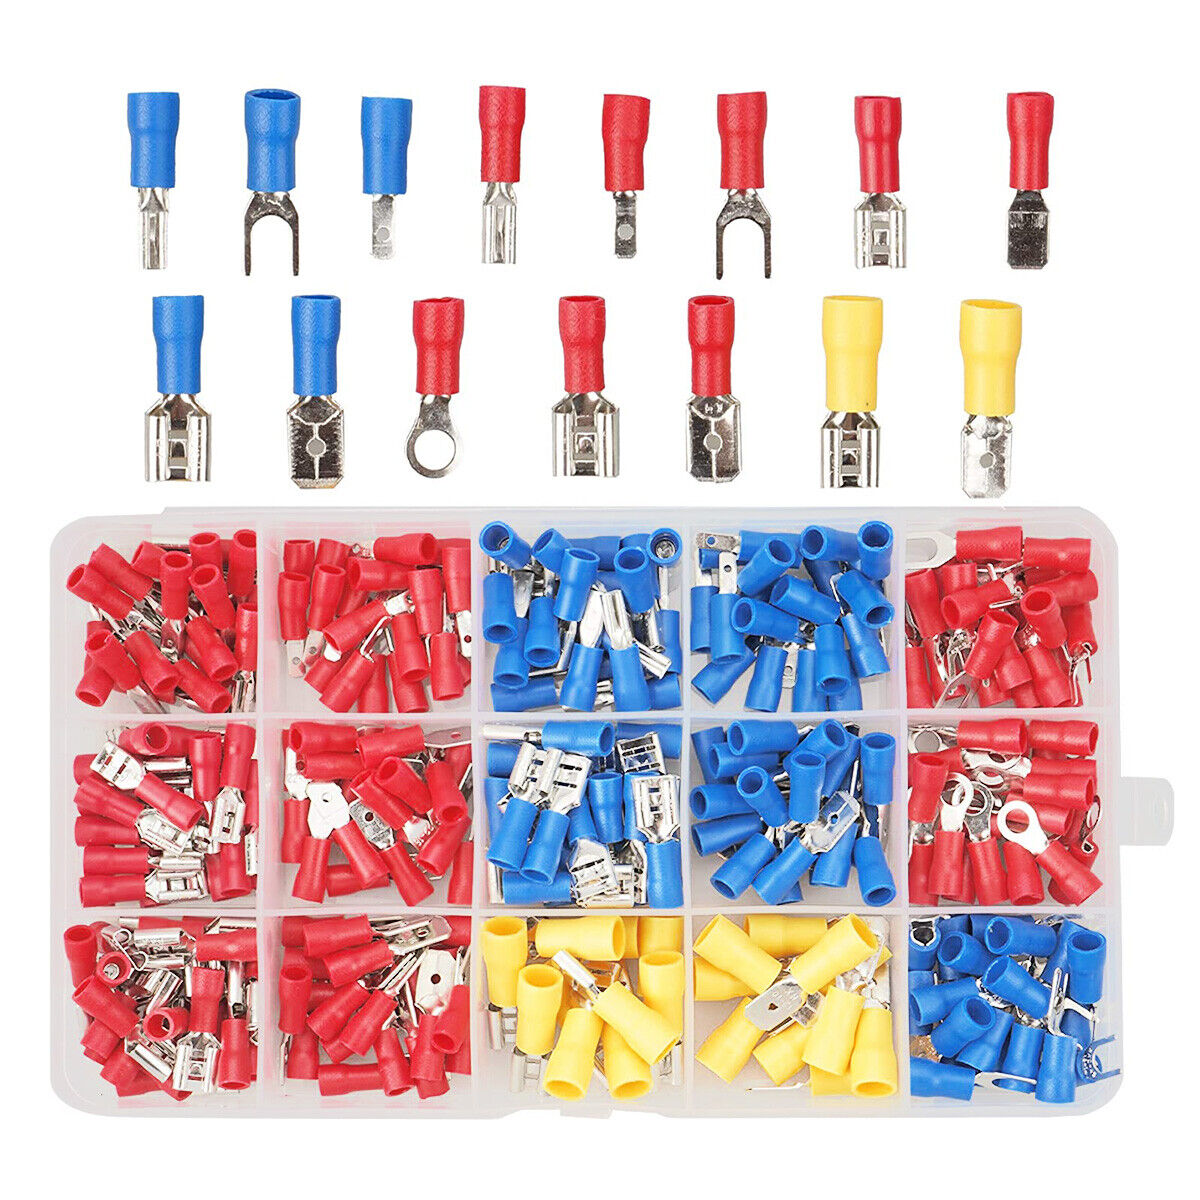 280PCS Assorted Crimp Spade Terminal Insulated Electrical Wire Connector Kit Set Unbranded Does Not Apply - фотография #12